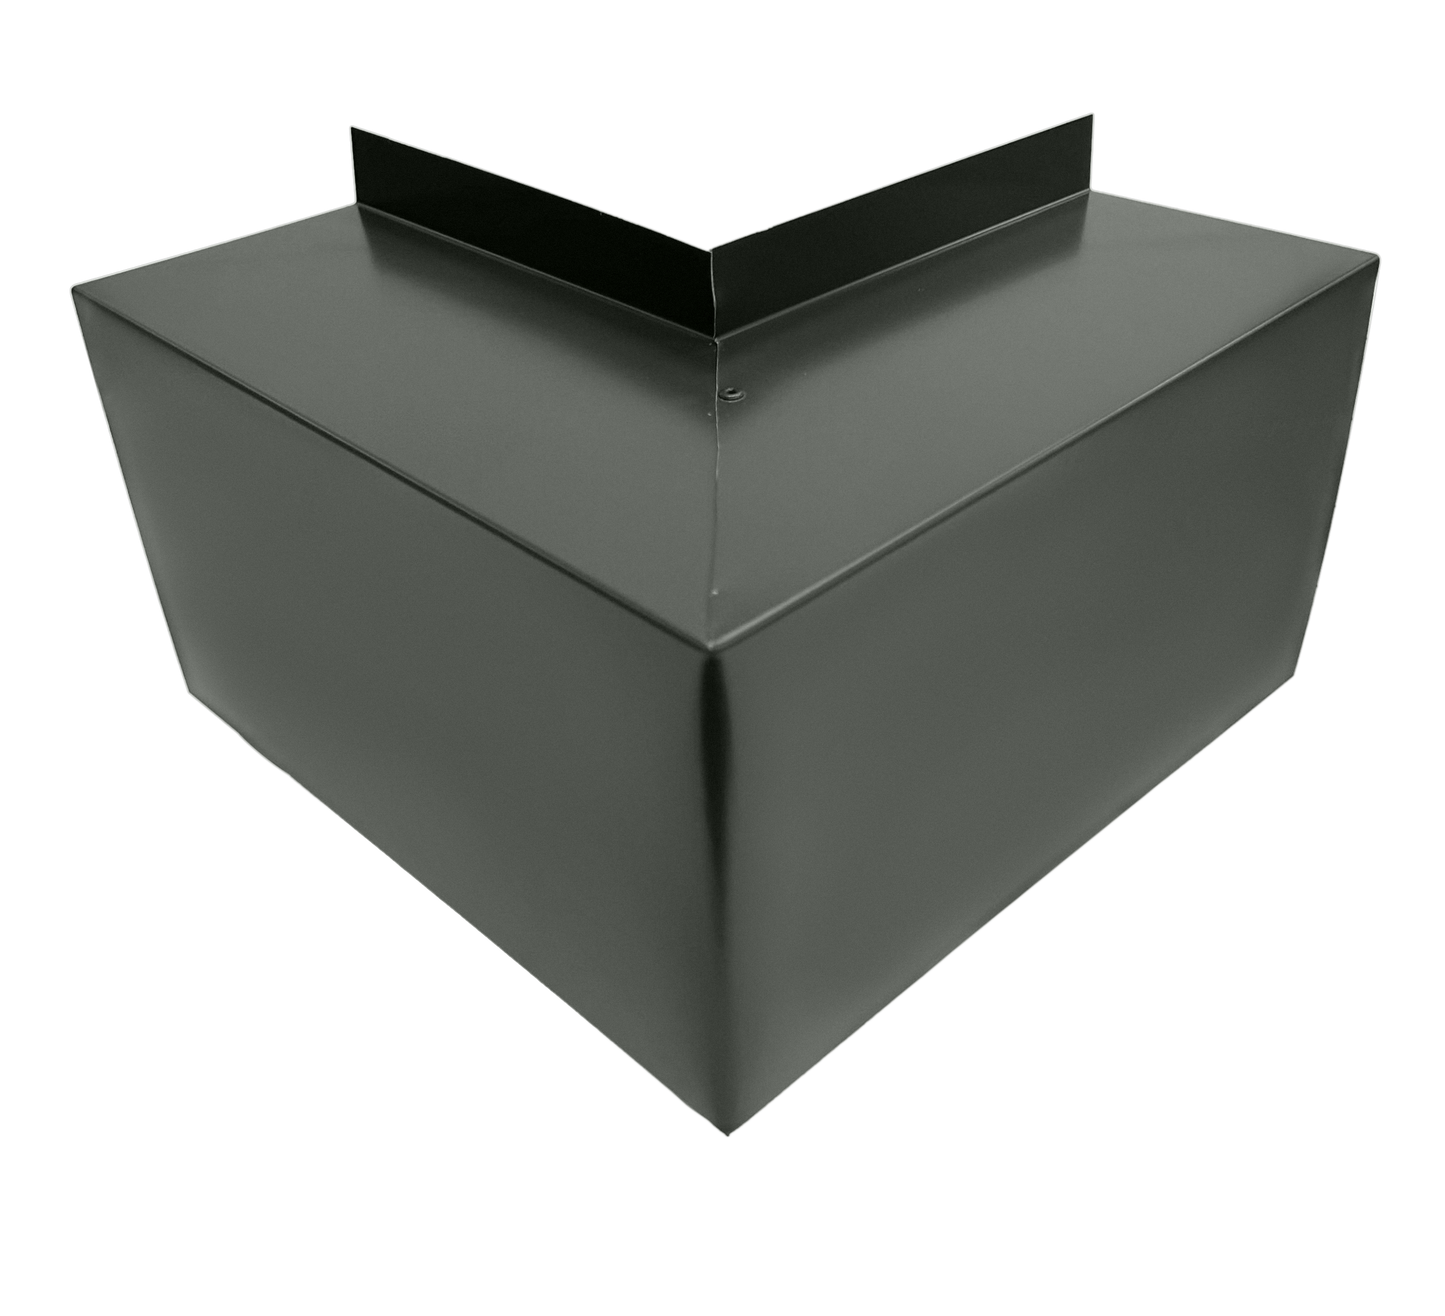 A black, angular metal object featuring a rectangular top with a raised V-shaped edge. The object has flat sides and a pointed bottom, forming a pyramid-like structure with a truncated peak. Made from 24 gauge steel elbows, it appears to be an industrial component designed for easy installation. This is the Perma Cover Commercial Series - 24 Gauge Line Set Cover Outside Corner Elbows - Premium Quality.